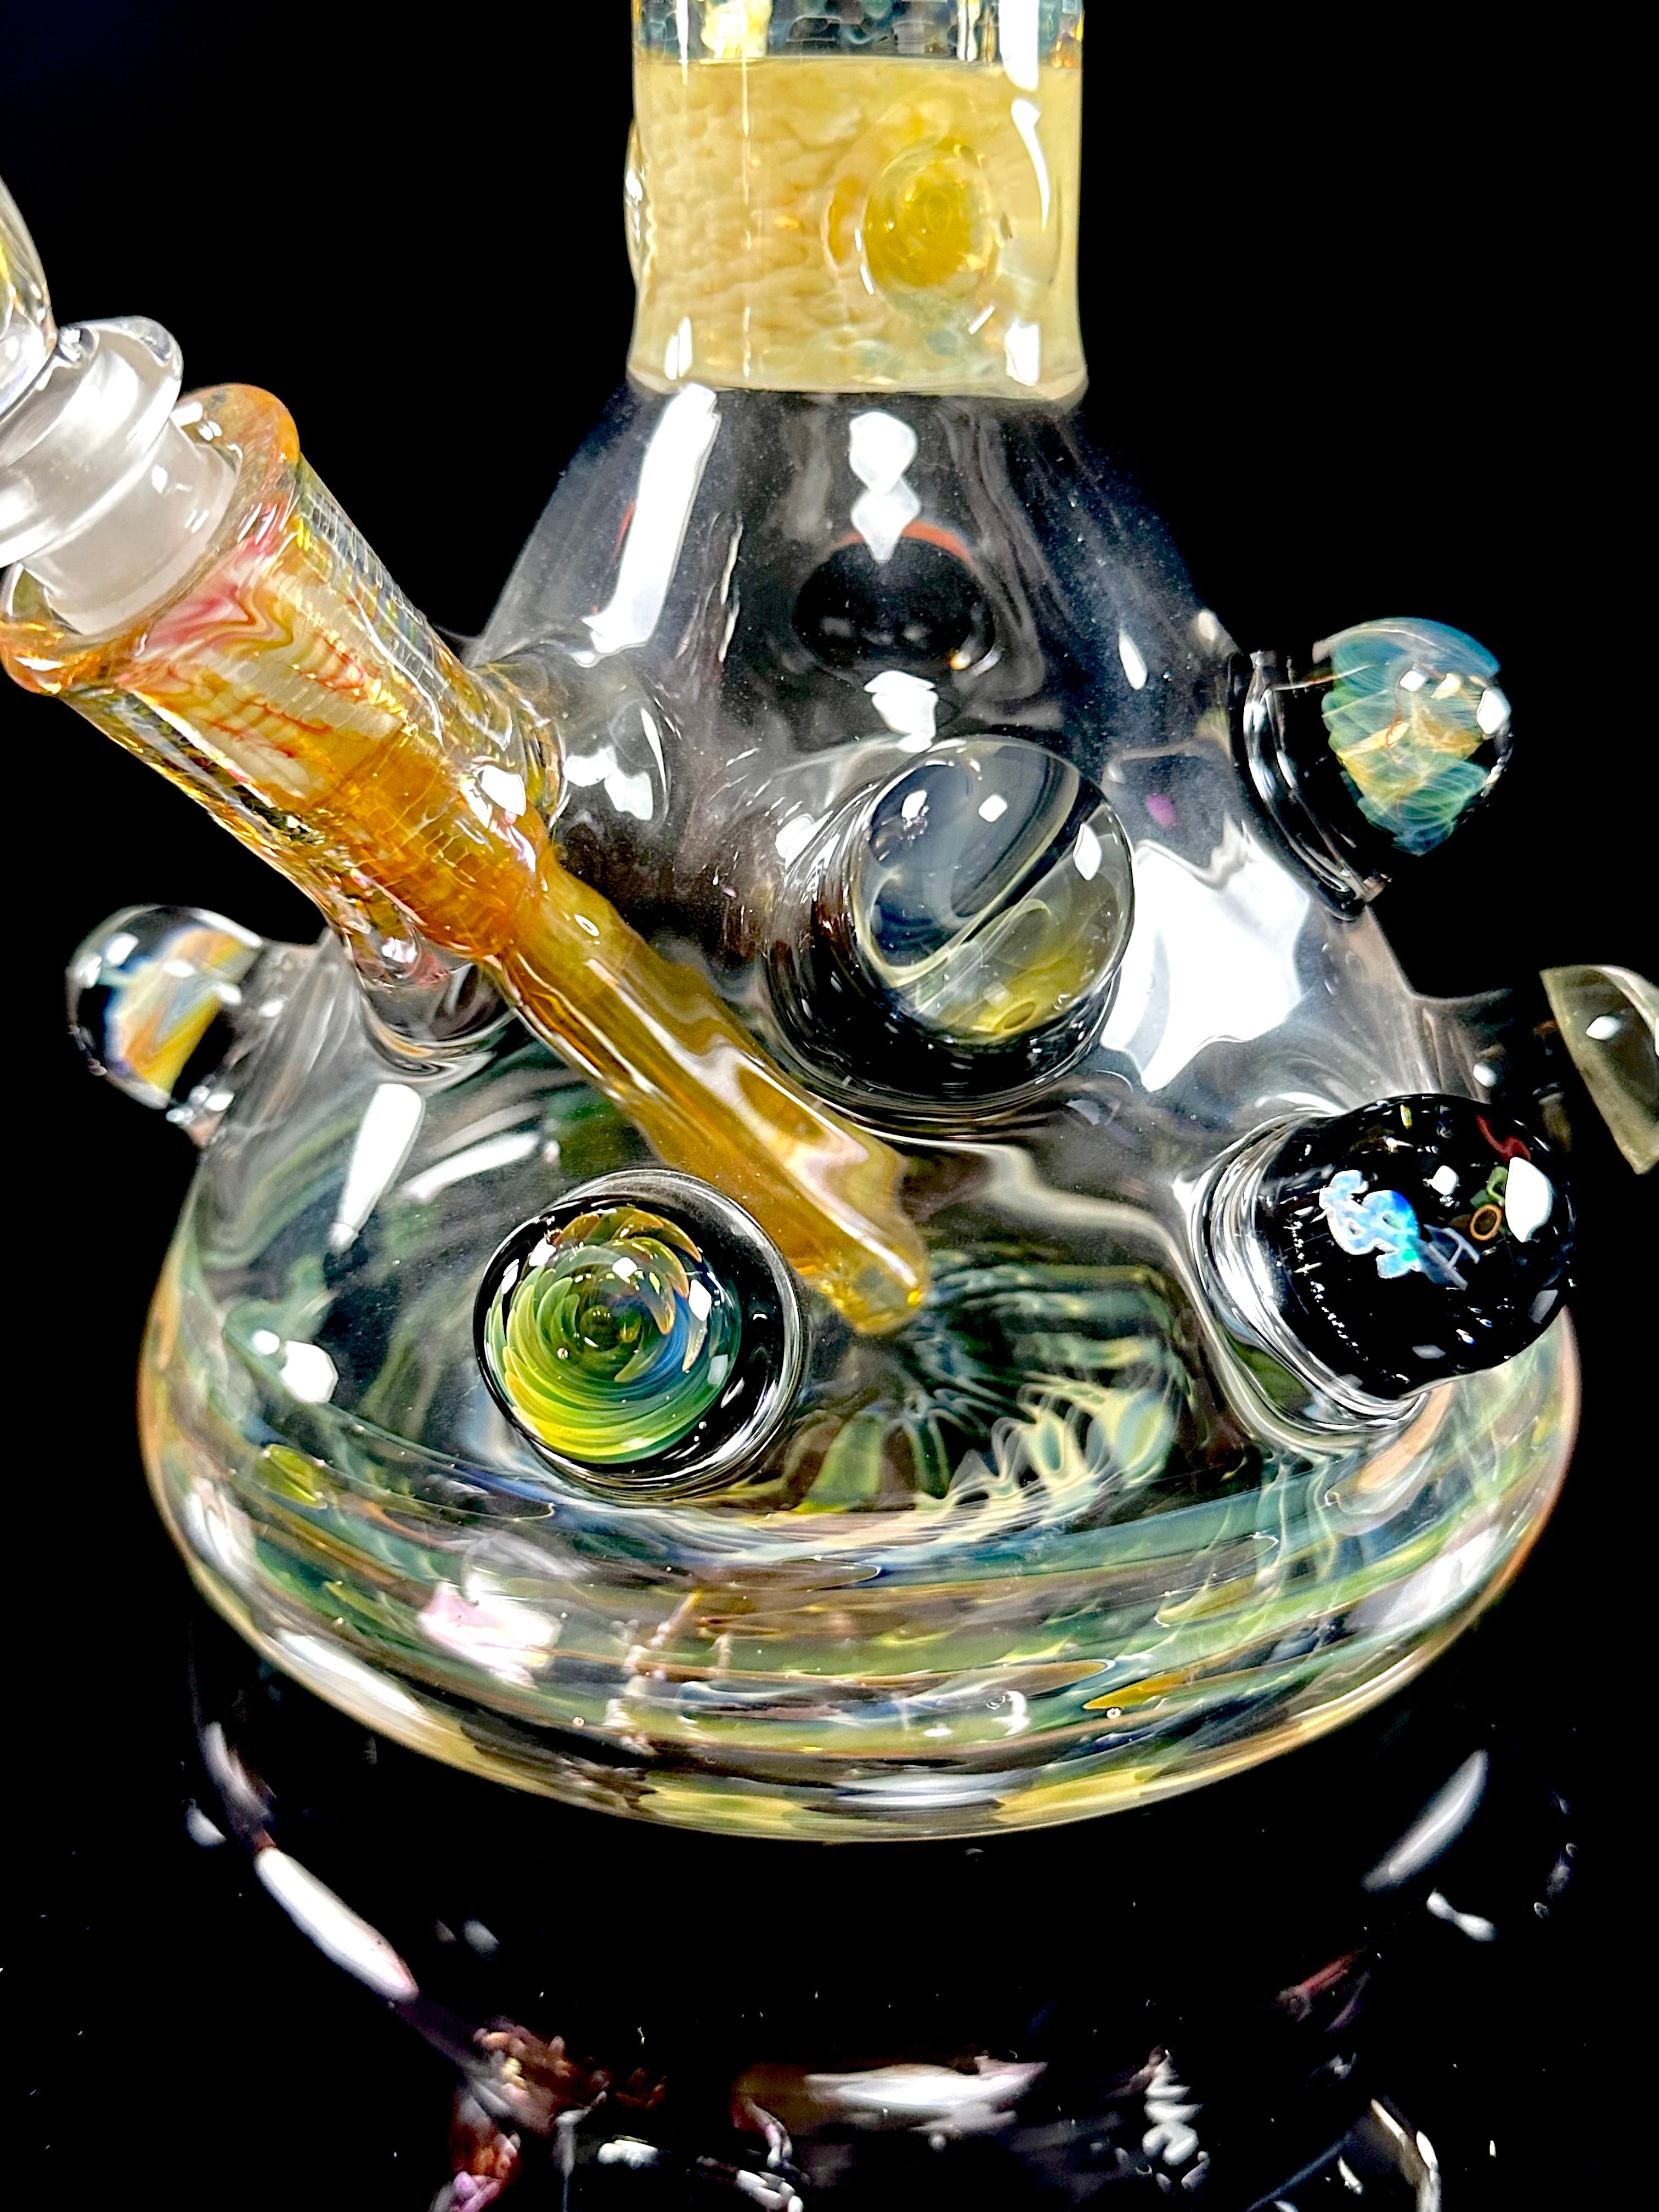 Hops x B$ Collab Beaker - Fully Fumed with Worked Marbles